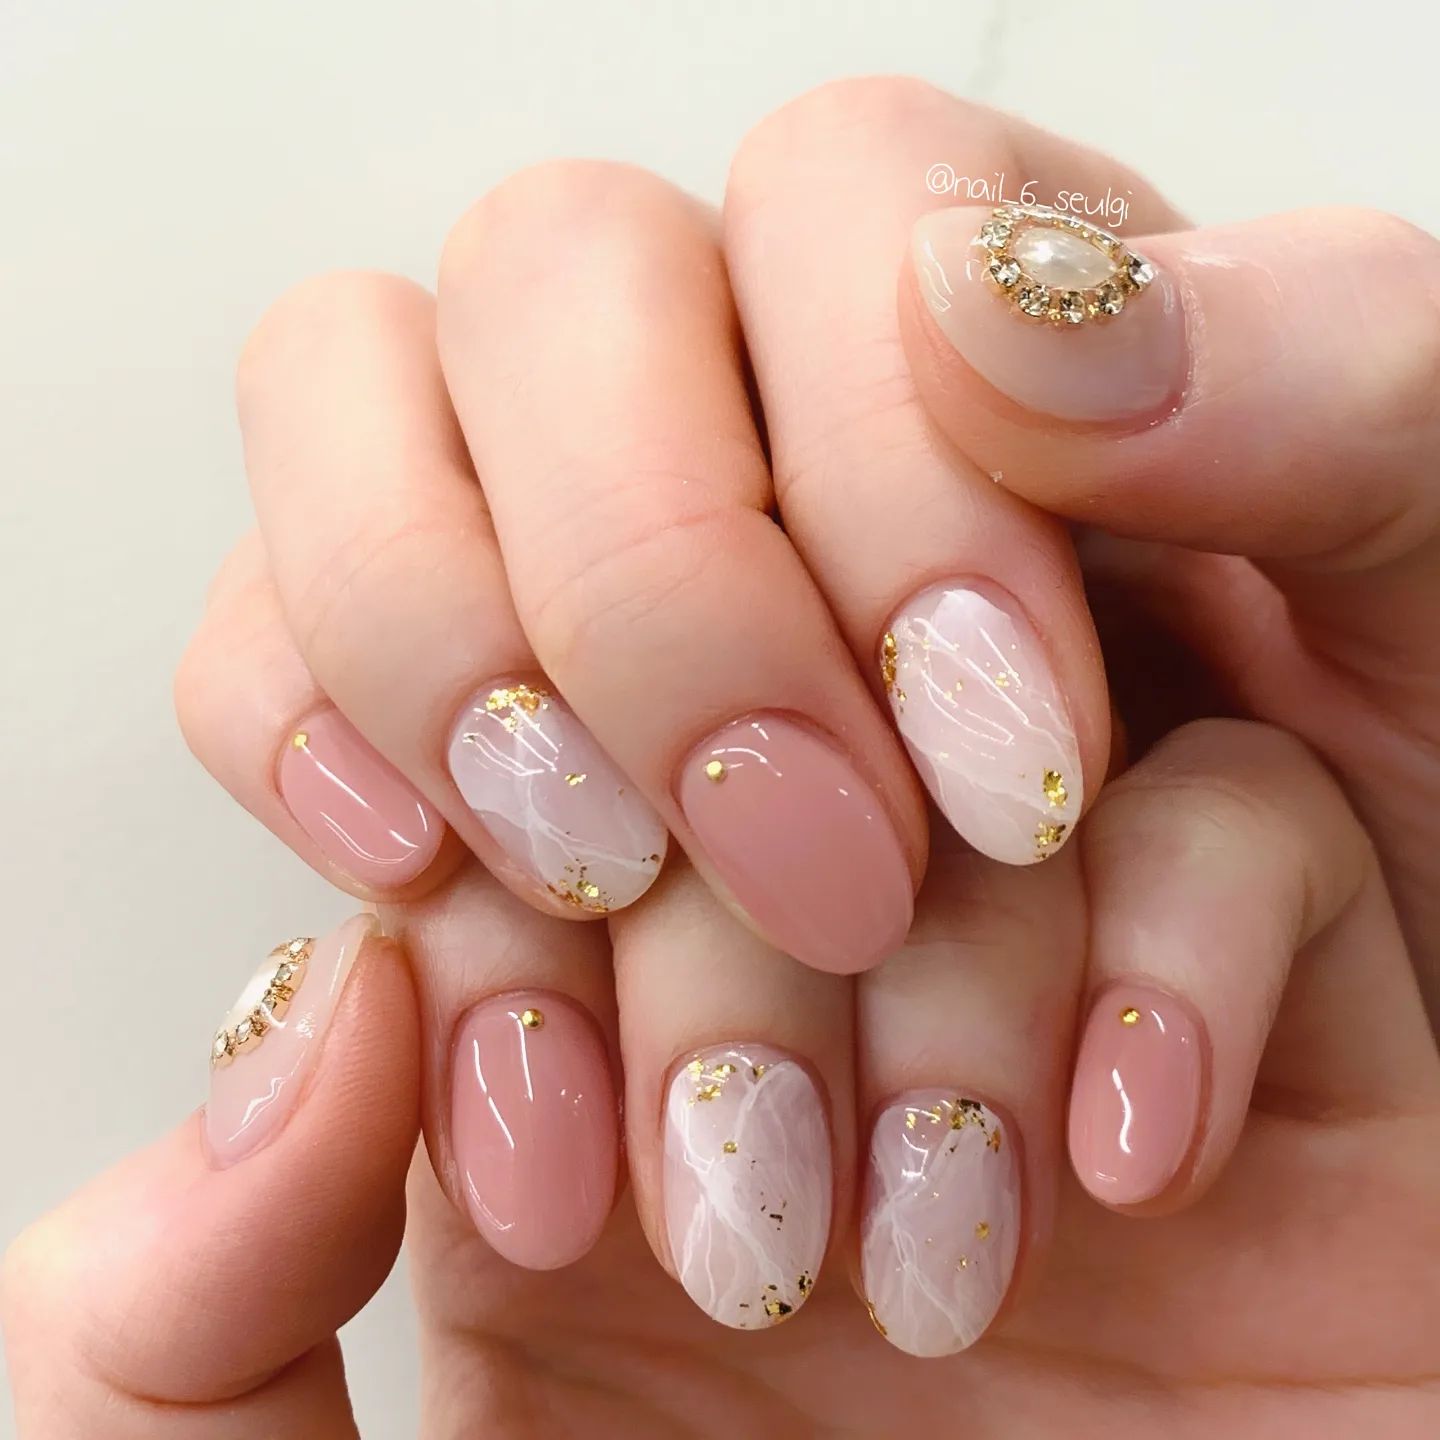 More and more women ask for a marble nail art and it has become so popular. Plus, it is a perfect choice for wedding, so go for it for your accent nails. If it is not enough for you, adding shiny stones is a good idea.